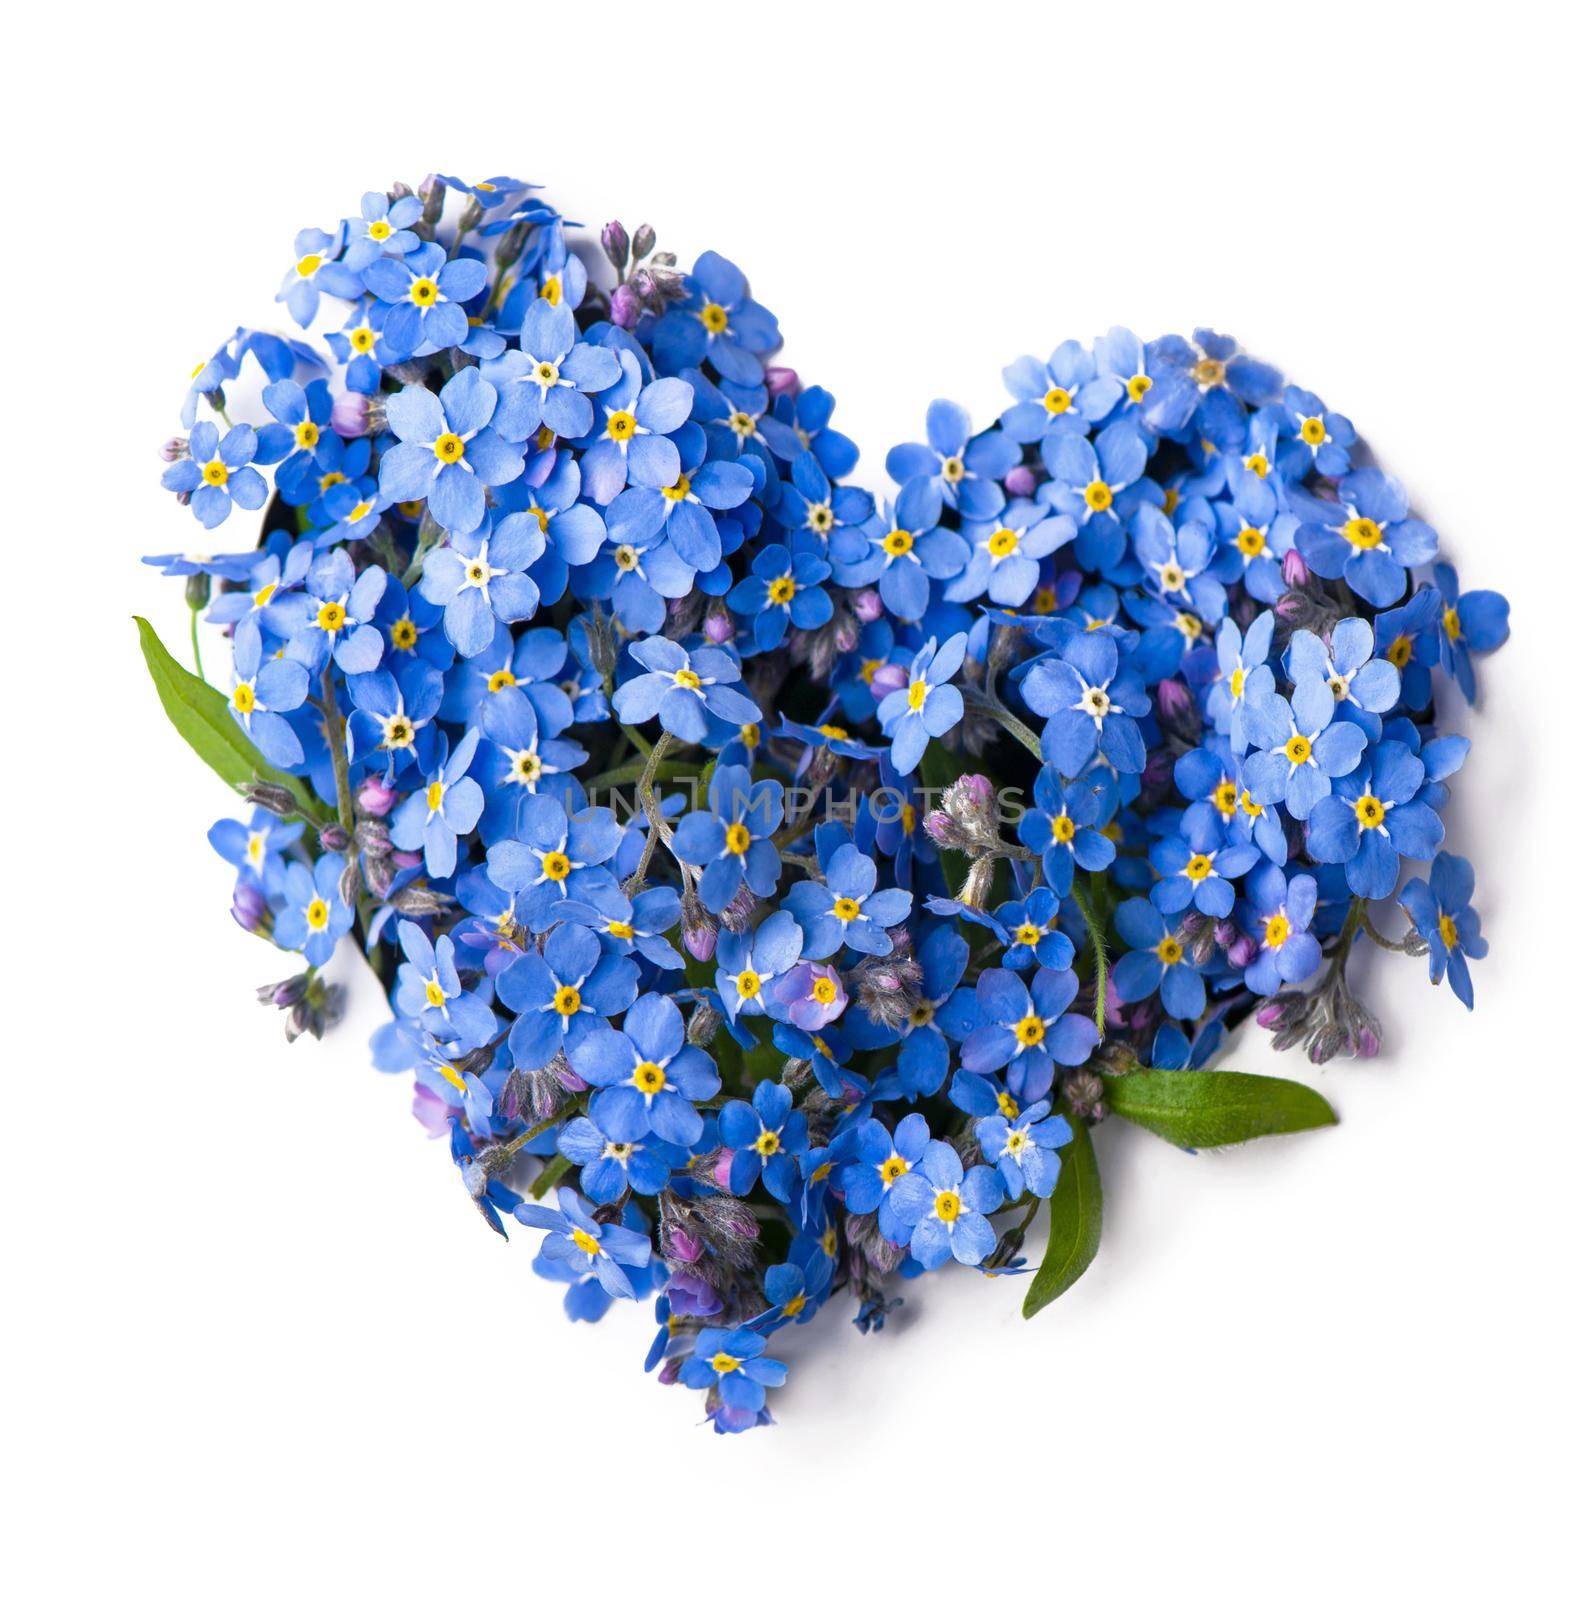 Forget me not, little flowers in heart shape, isolated on white. by aprilphoto